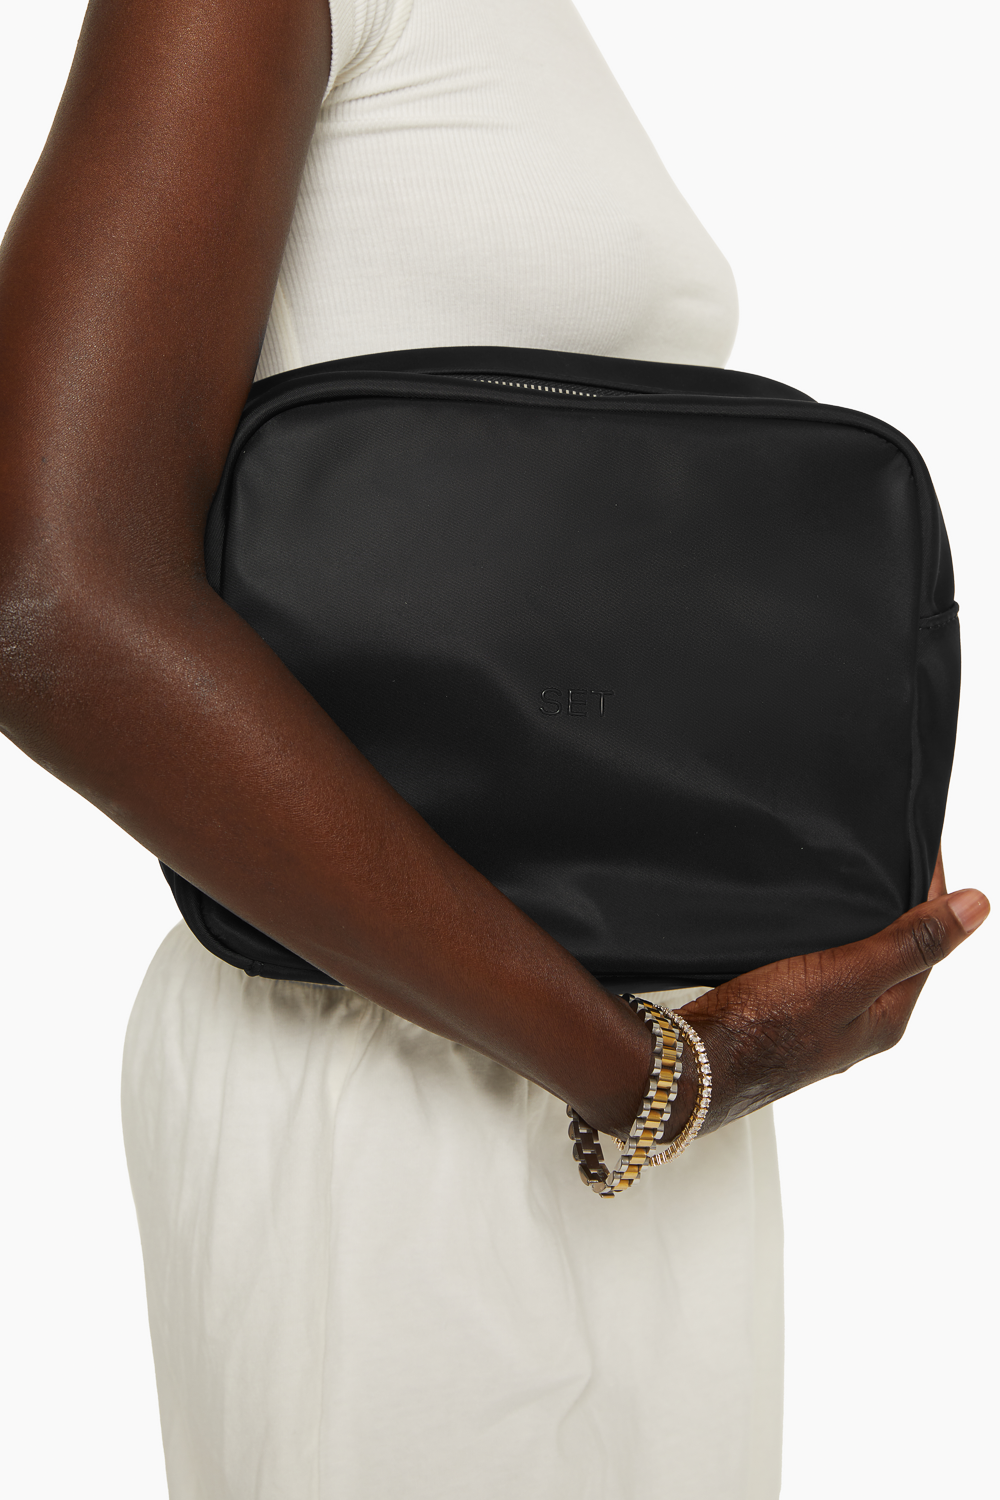 SET™ EVERYTHING BAG IN ONYX